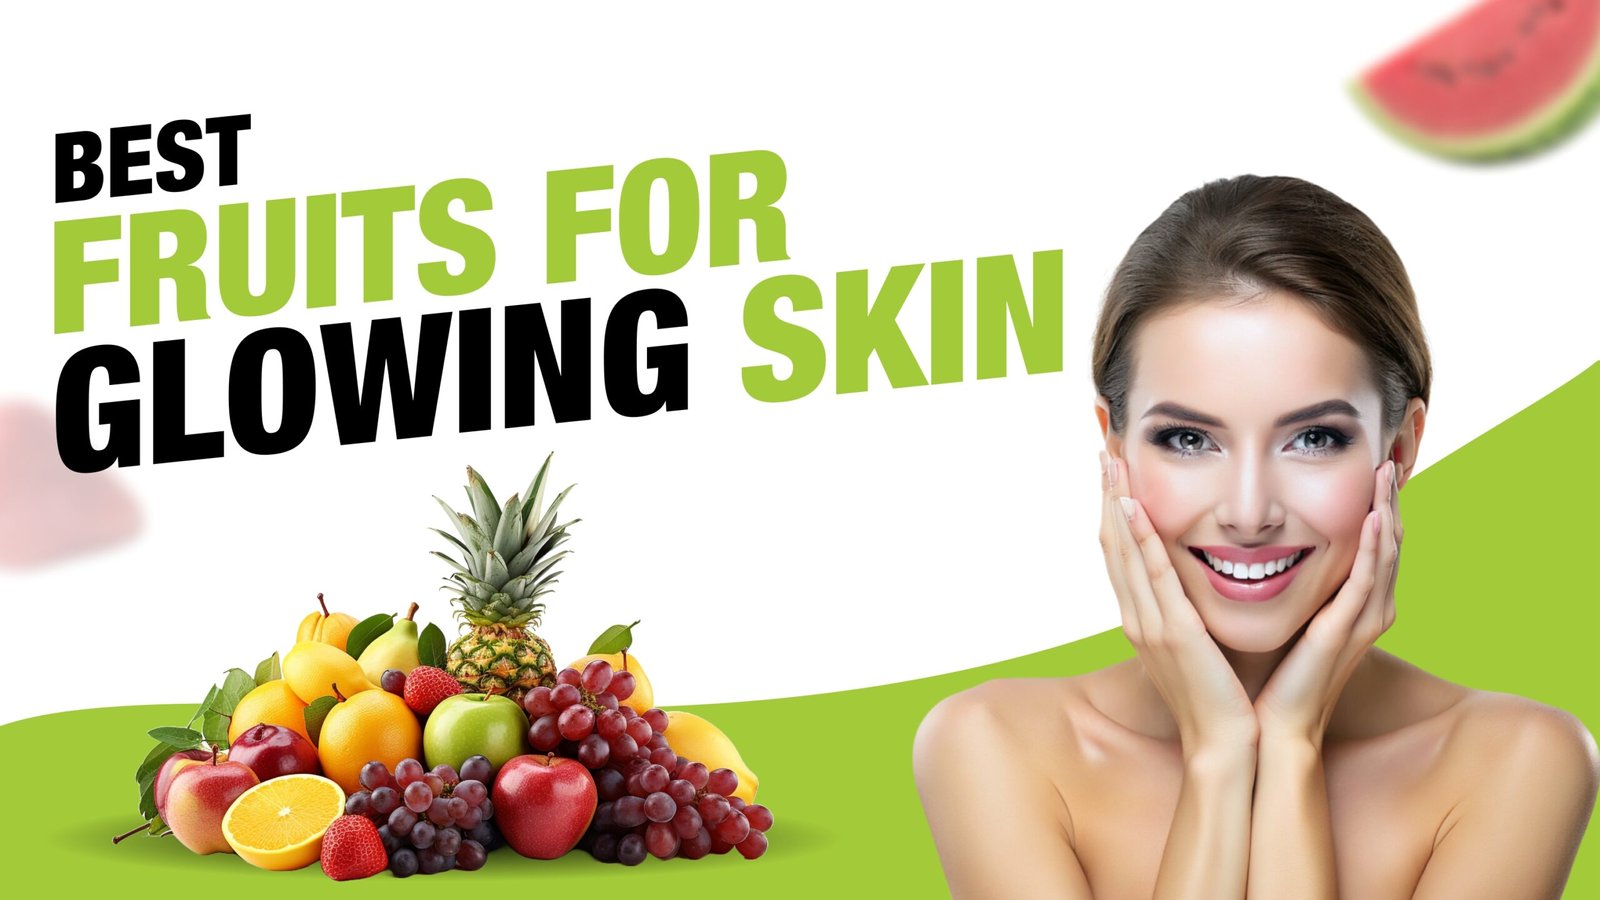 Vitamin C Rich Fruits for Glowing Skin